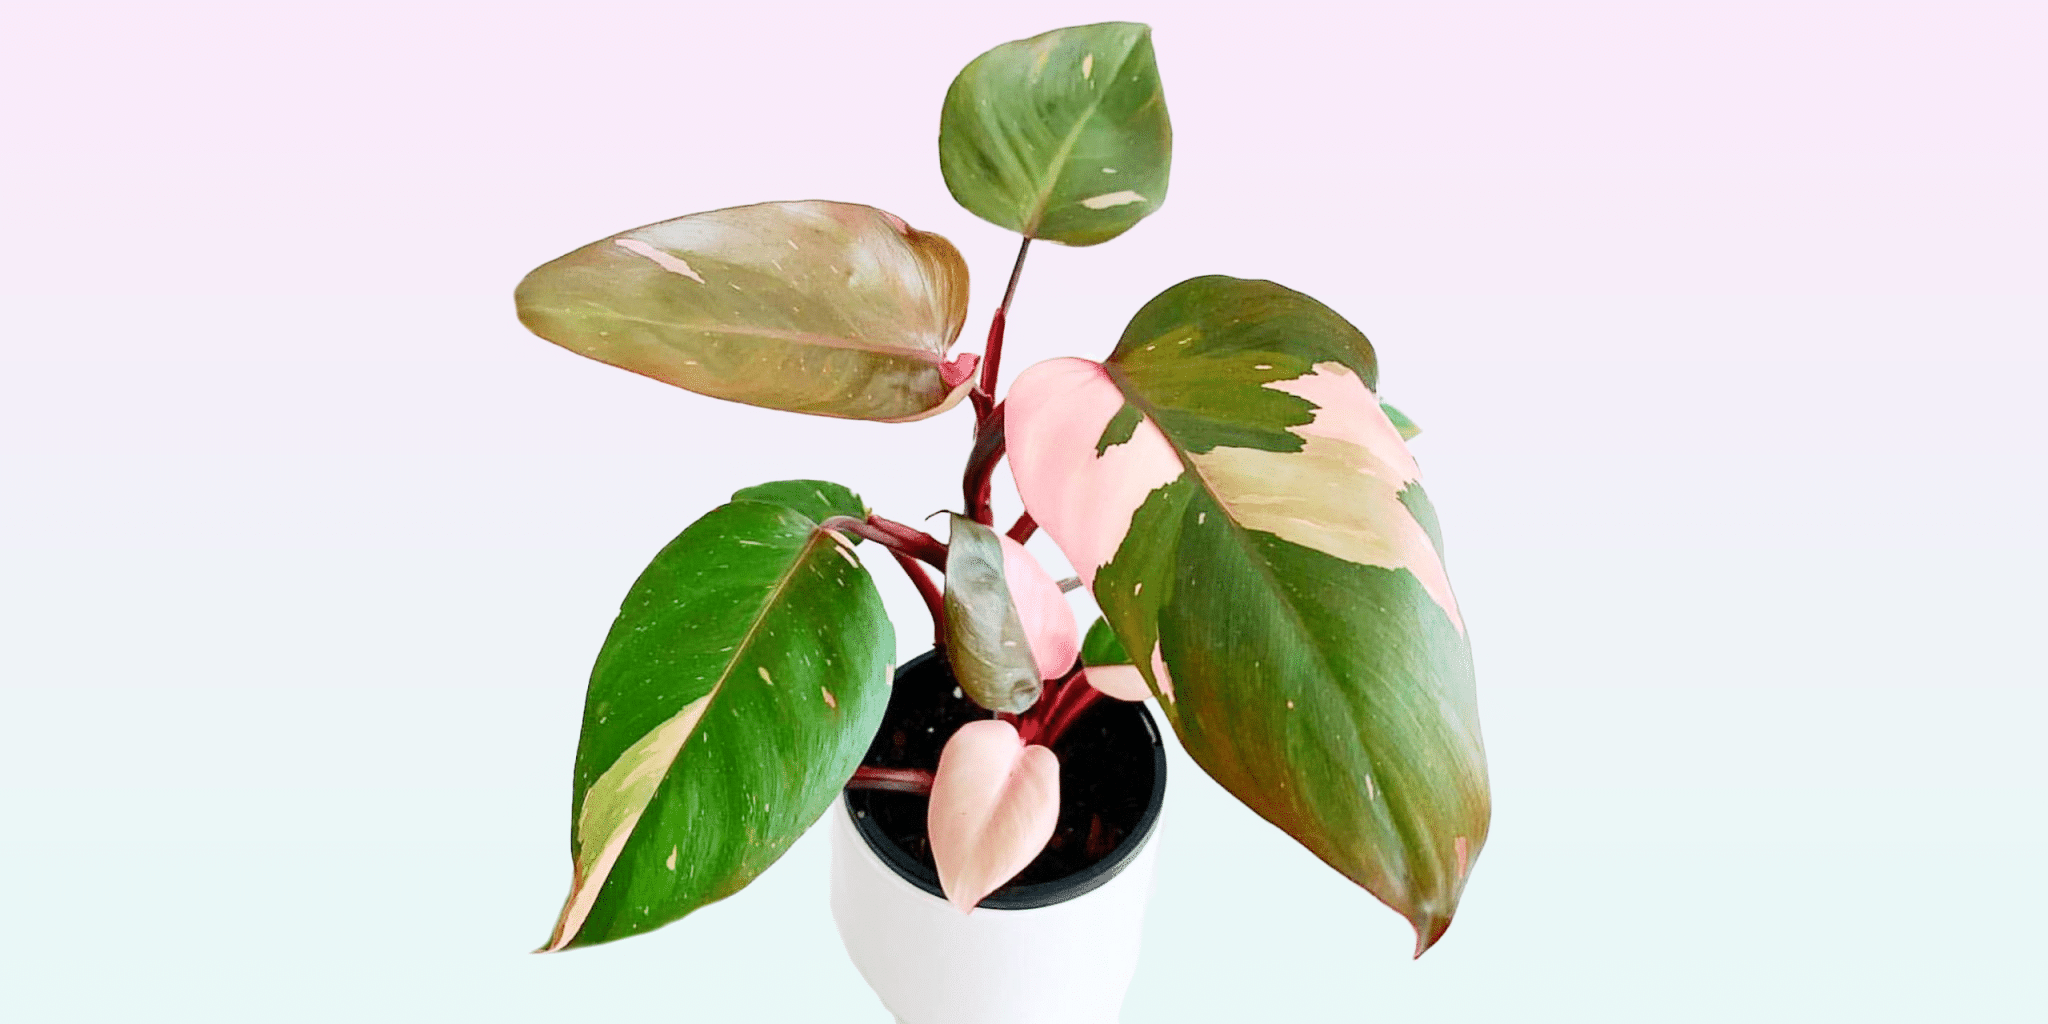 A rare blushing philodendron with trailing plant